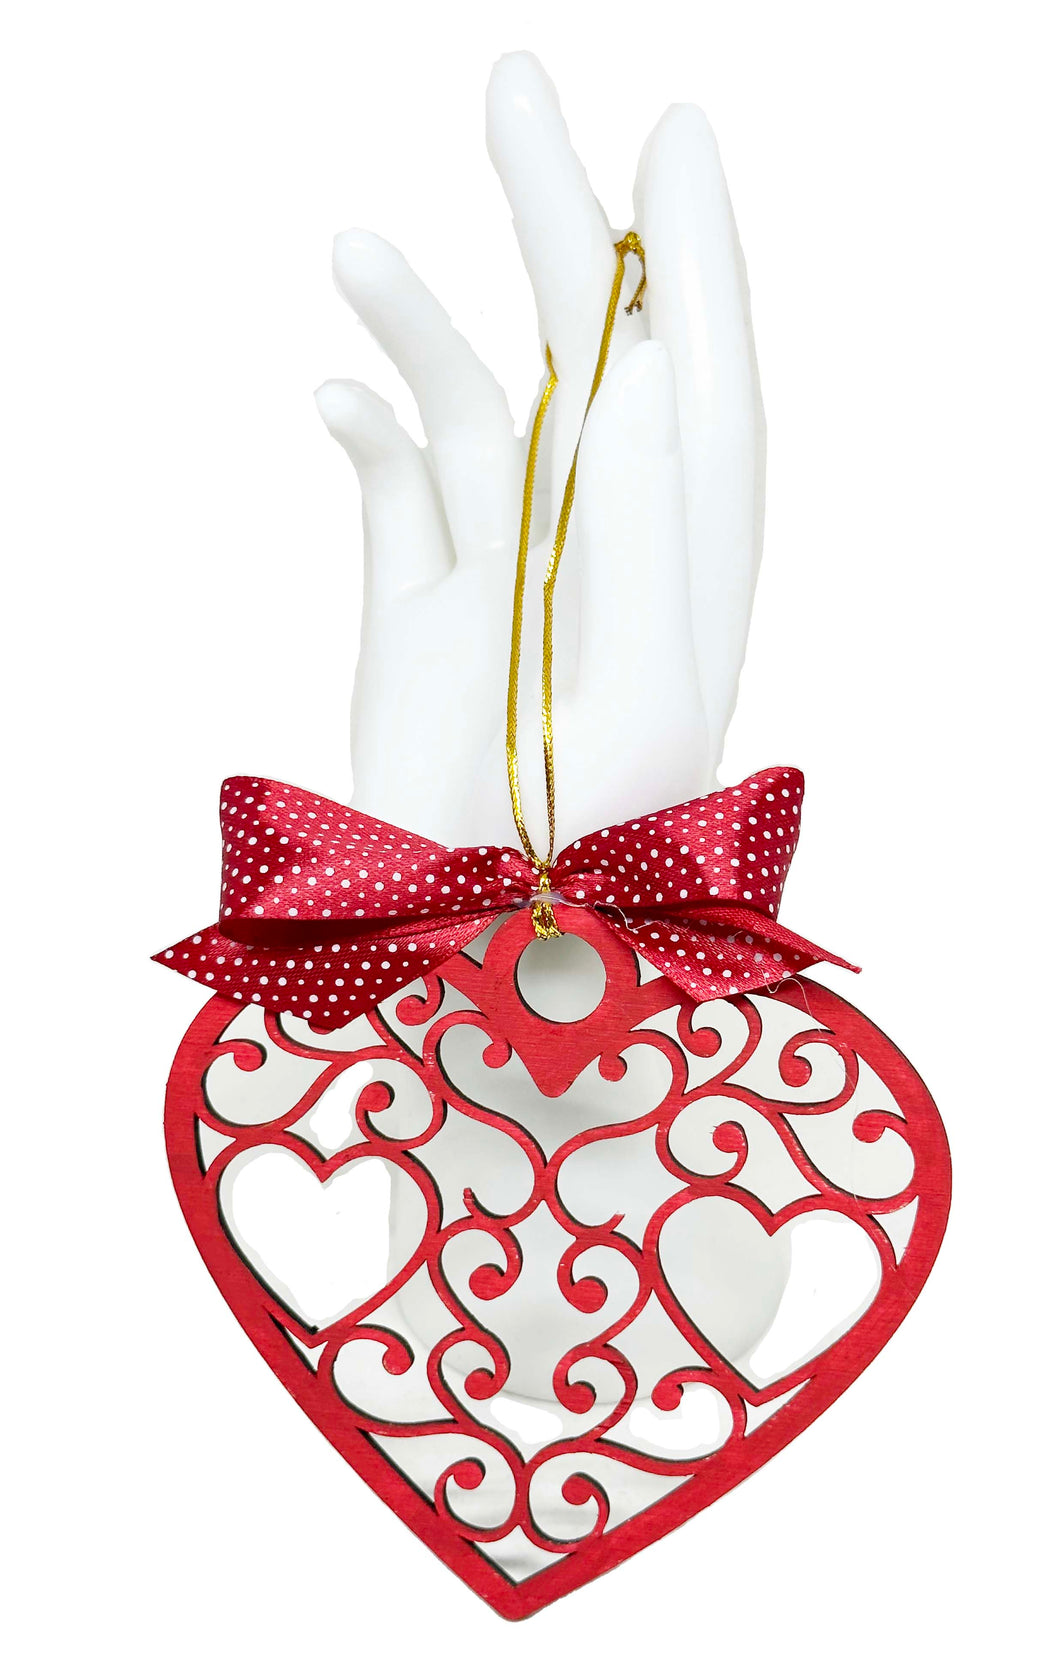 Heart shaped carved and painted wooden ornament